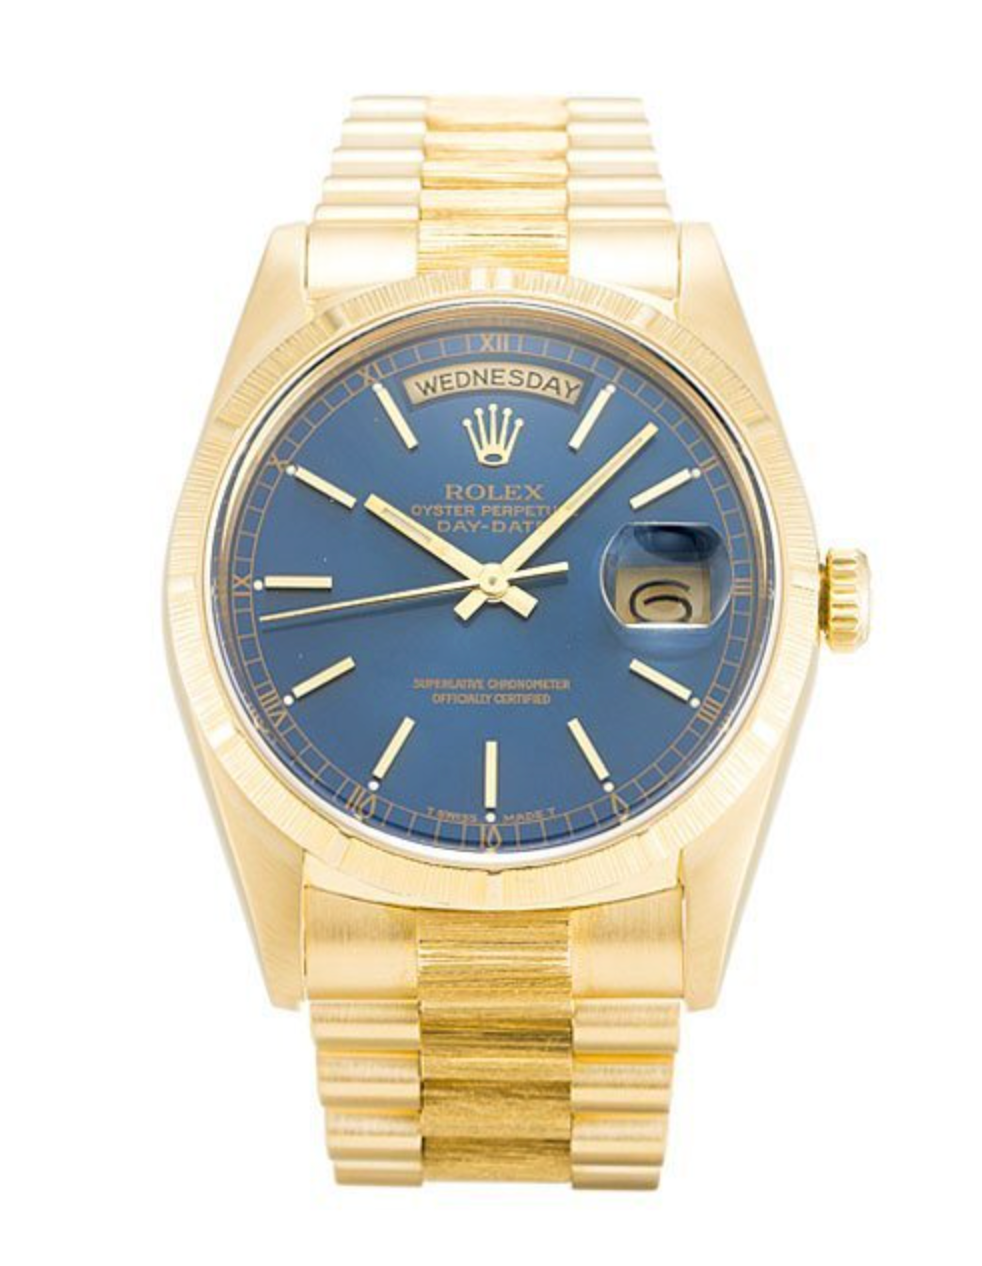 Replica Rolex Day-Date Gold with Blue Dial